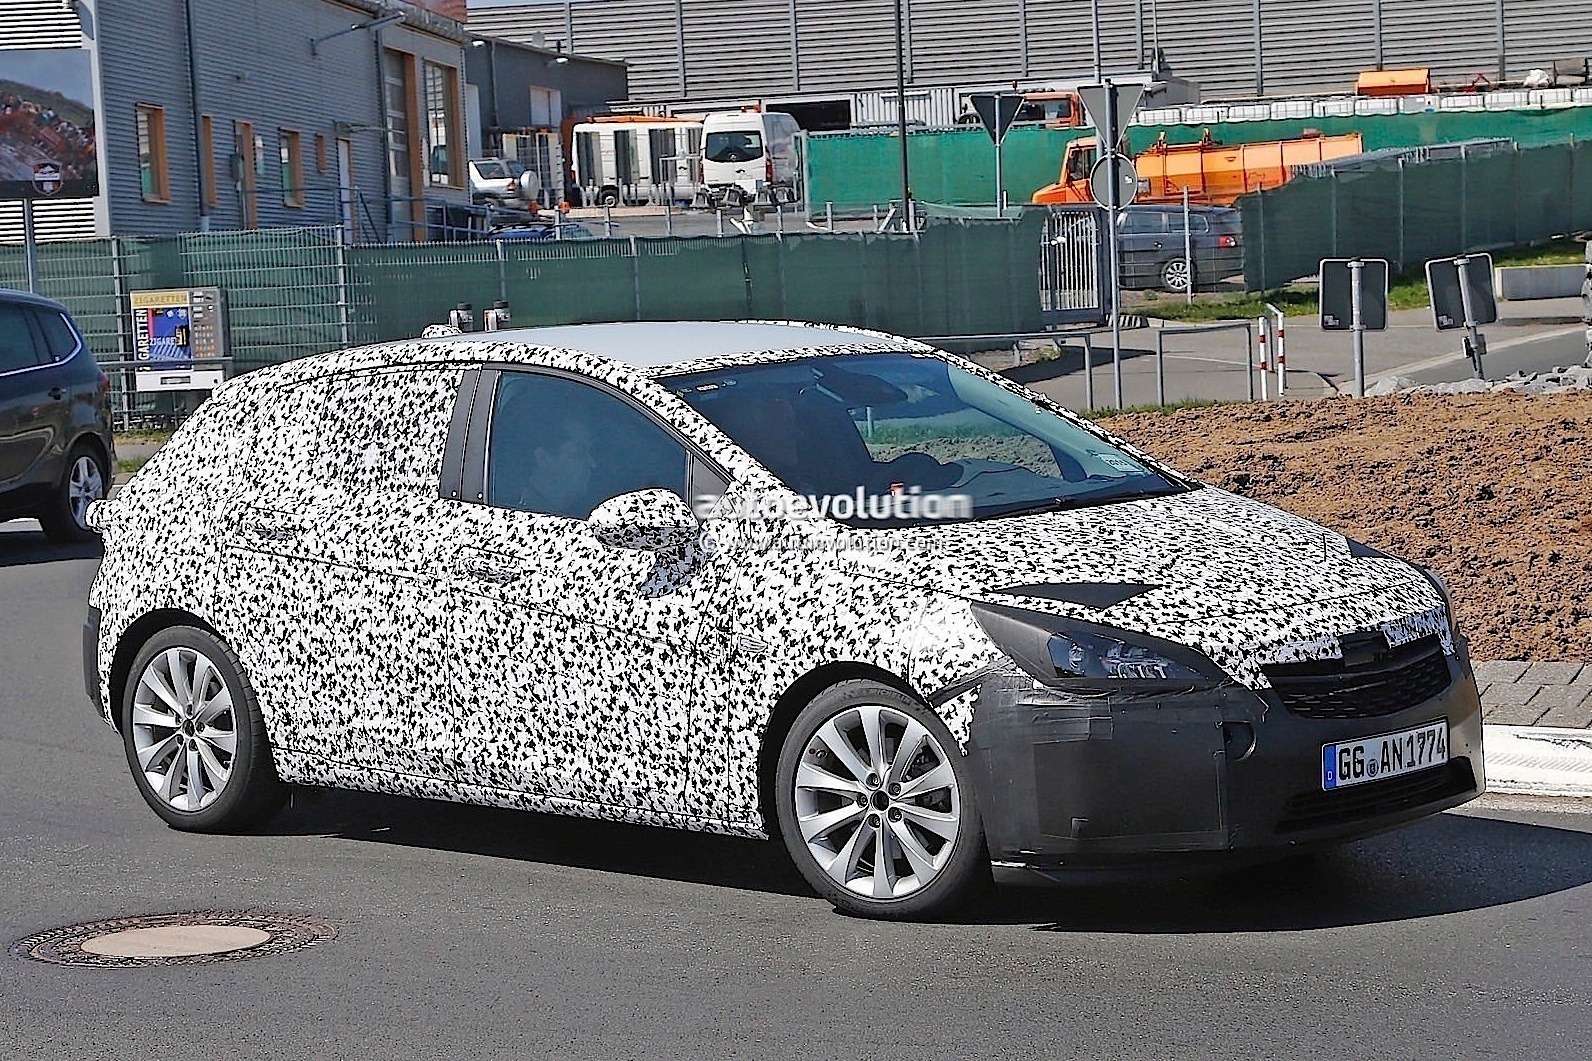 sportier-2016-opel-astra-gsi-spied-could-rival-focus-st-and-golf-gti-photo-gallery_3